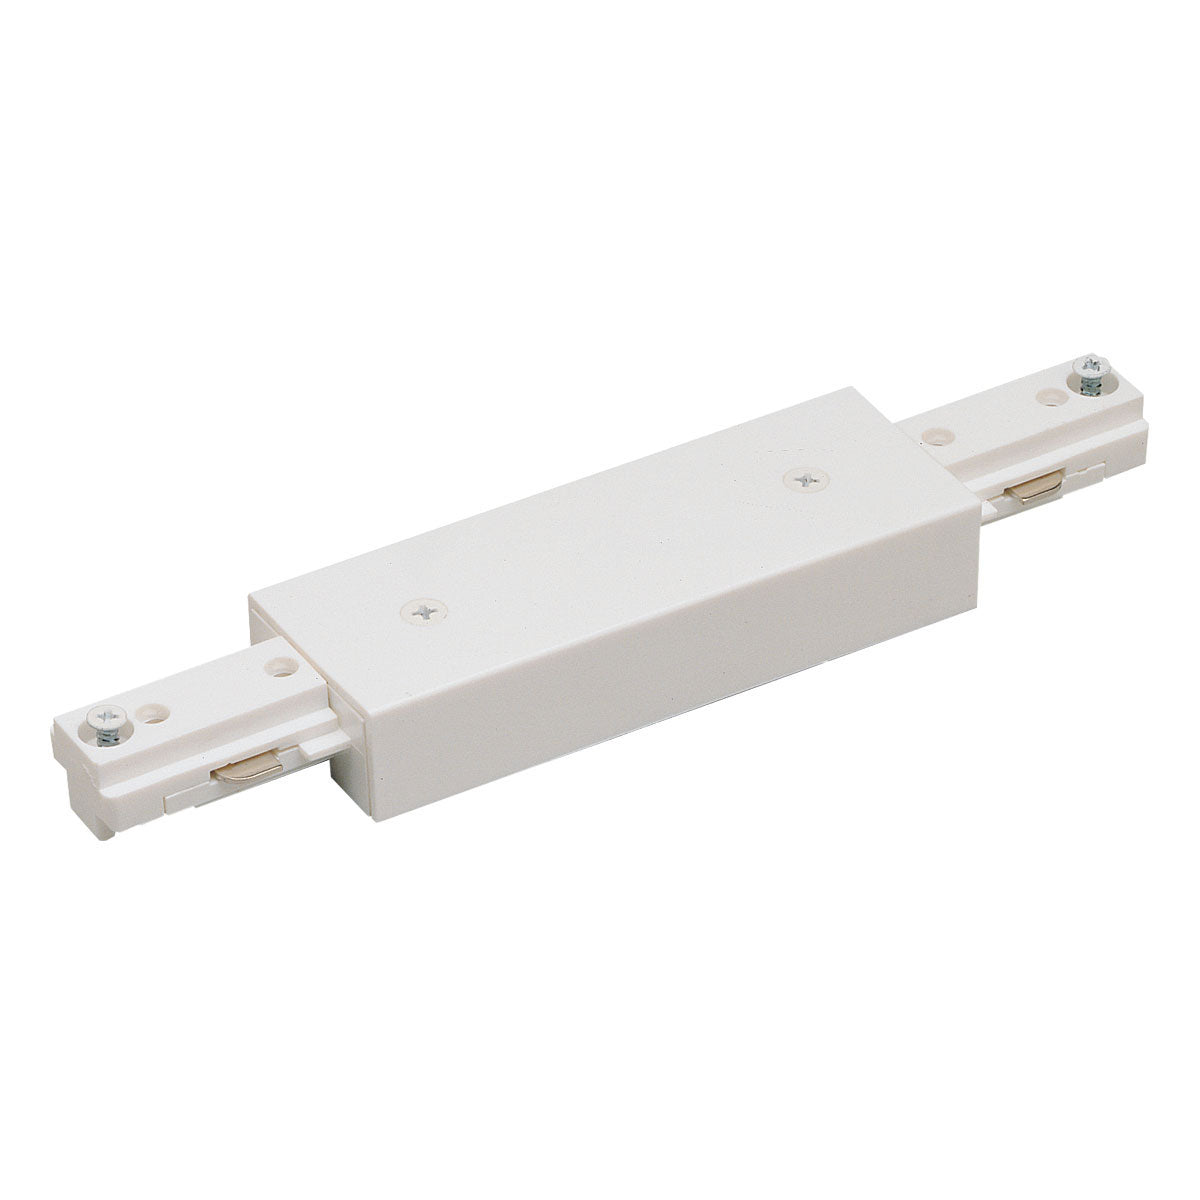 Nora Lighting NT-312W - Track - I Connector, 1 Circuit Track, White